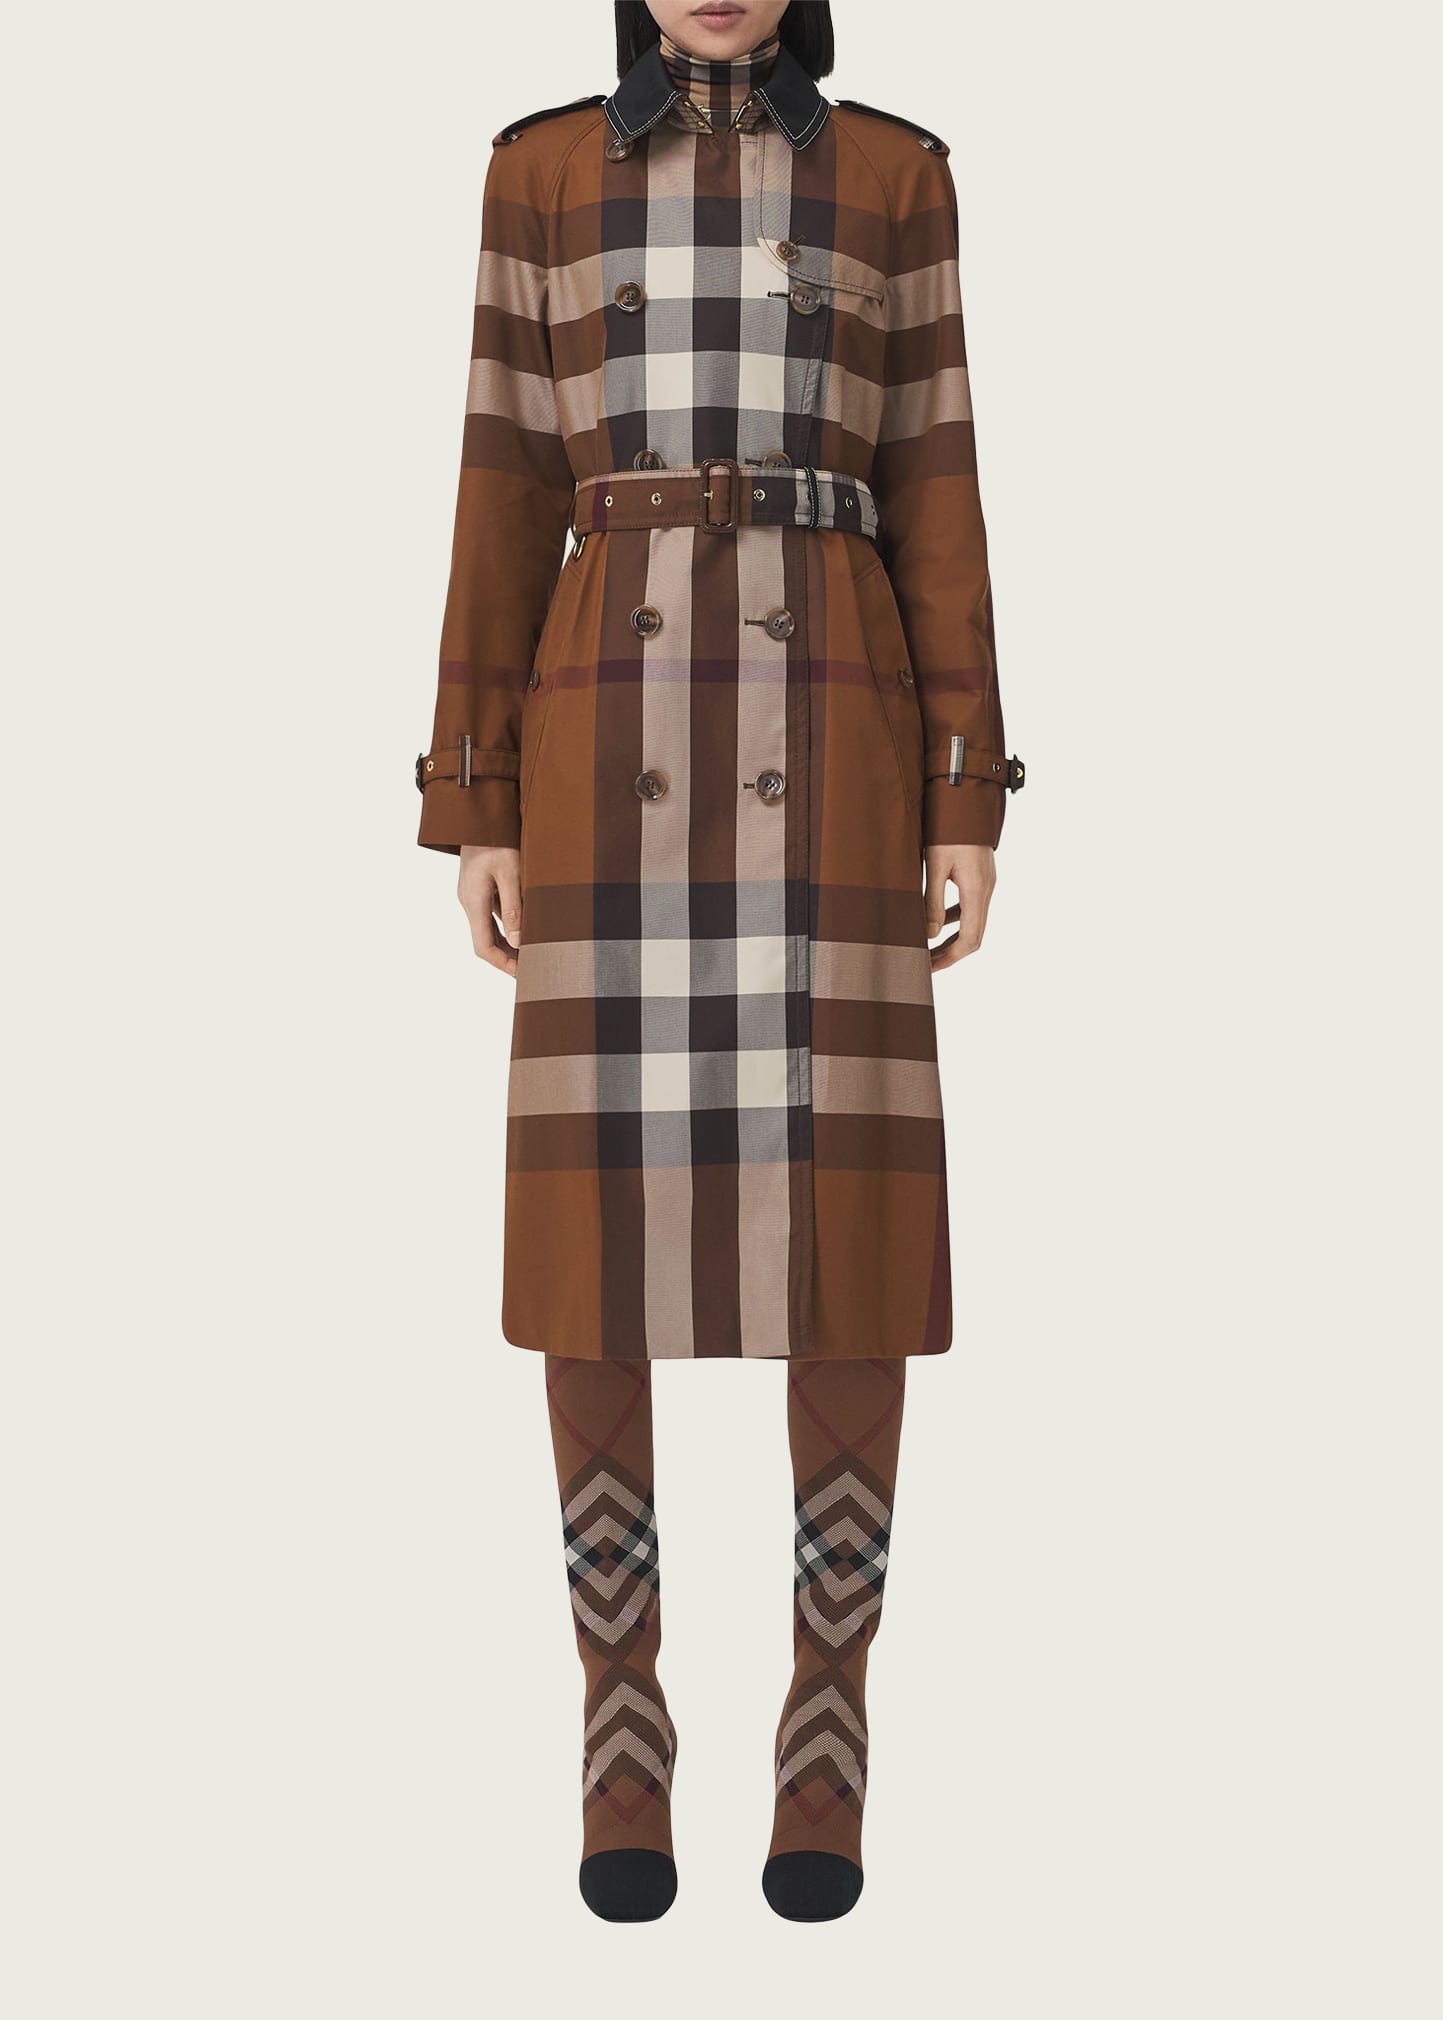 Burberry Waterloo Check-Print Double-Breasted Trench Coat